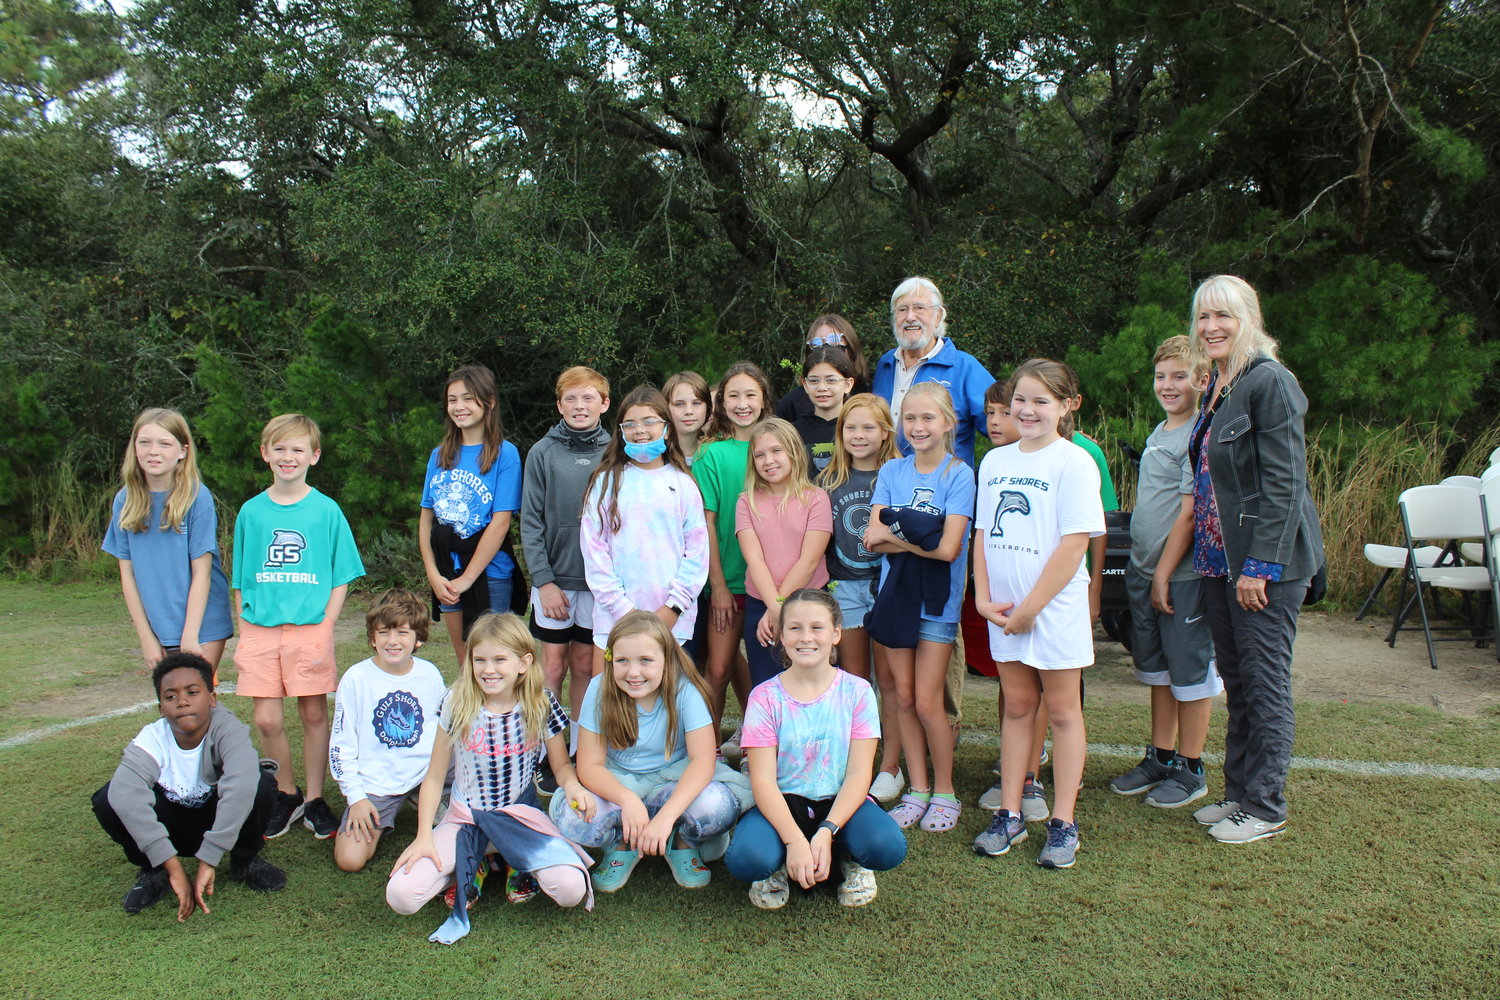 Jean-Michele Cousteau toured the site for the Gulf Coast Eco Center with students during the ground saving event. Students collects reindeer moss and other native plants that will be cared for until being replanted after construction is complete.